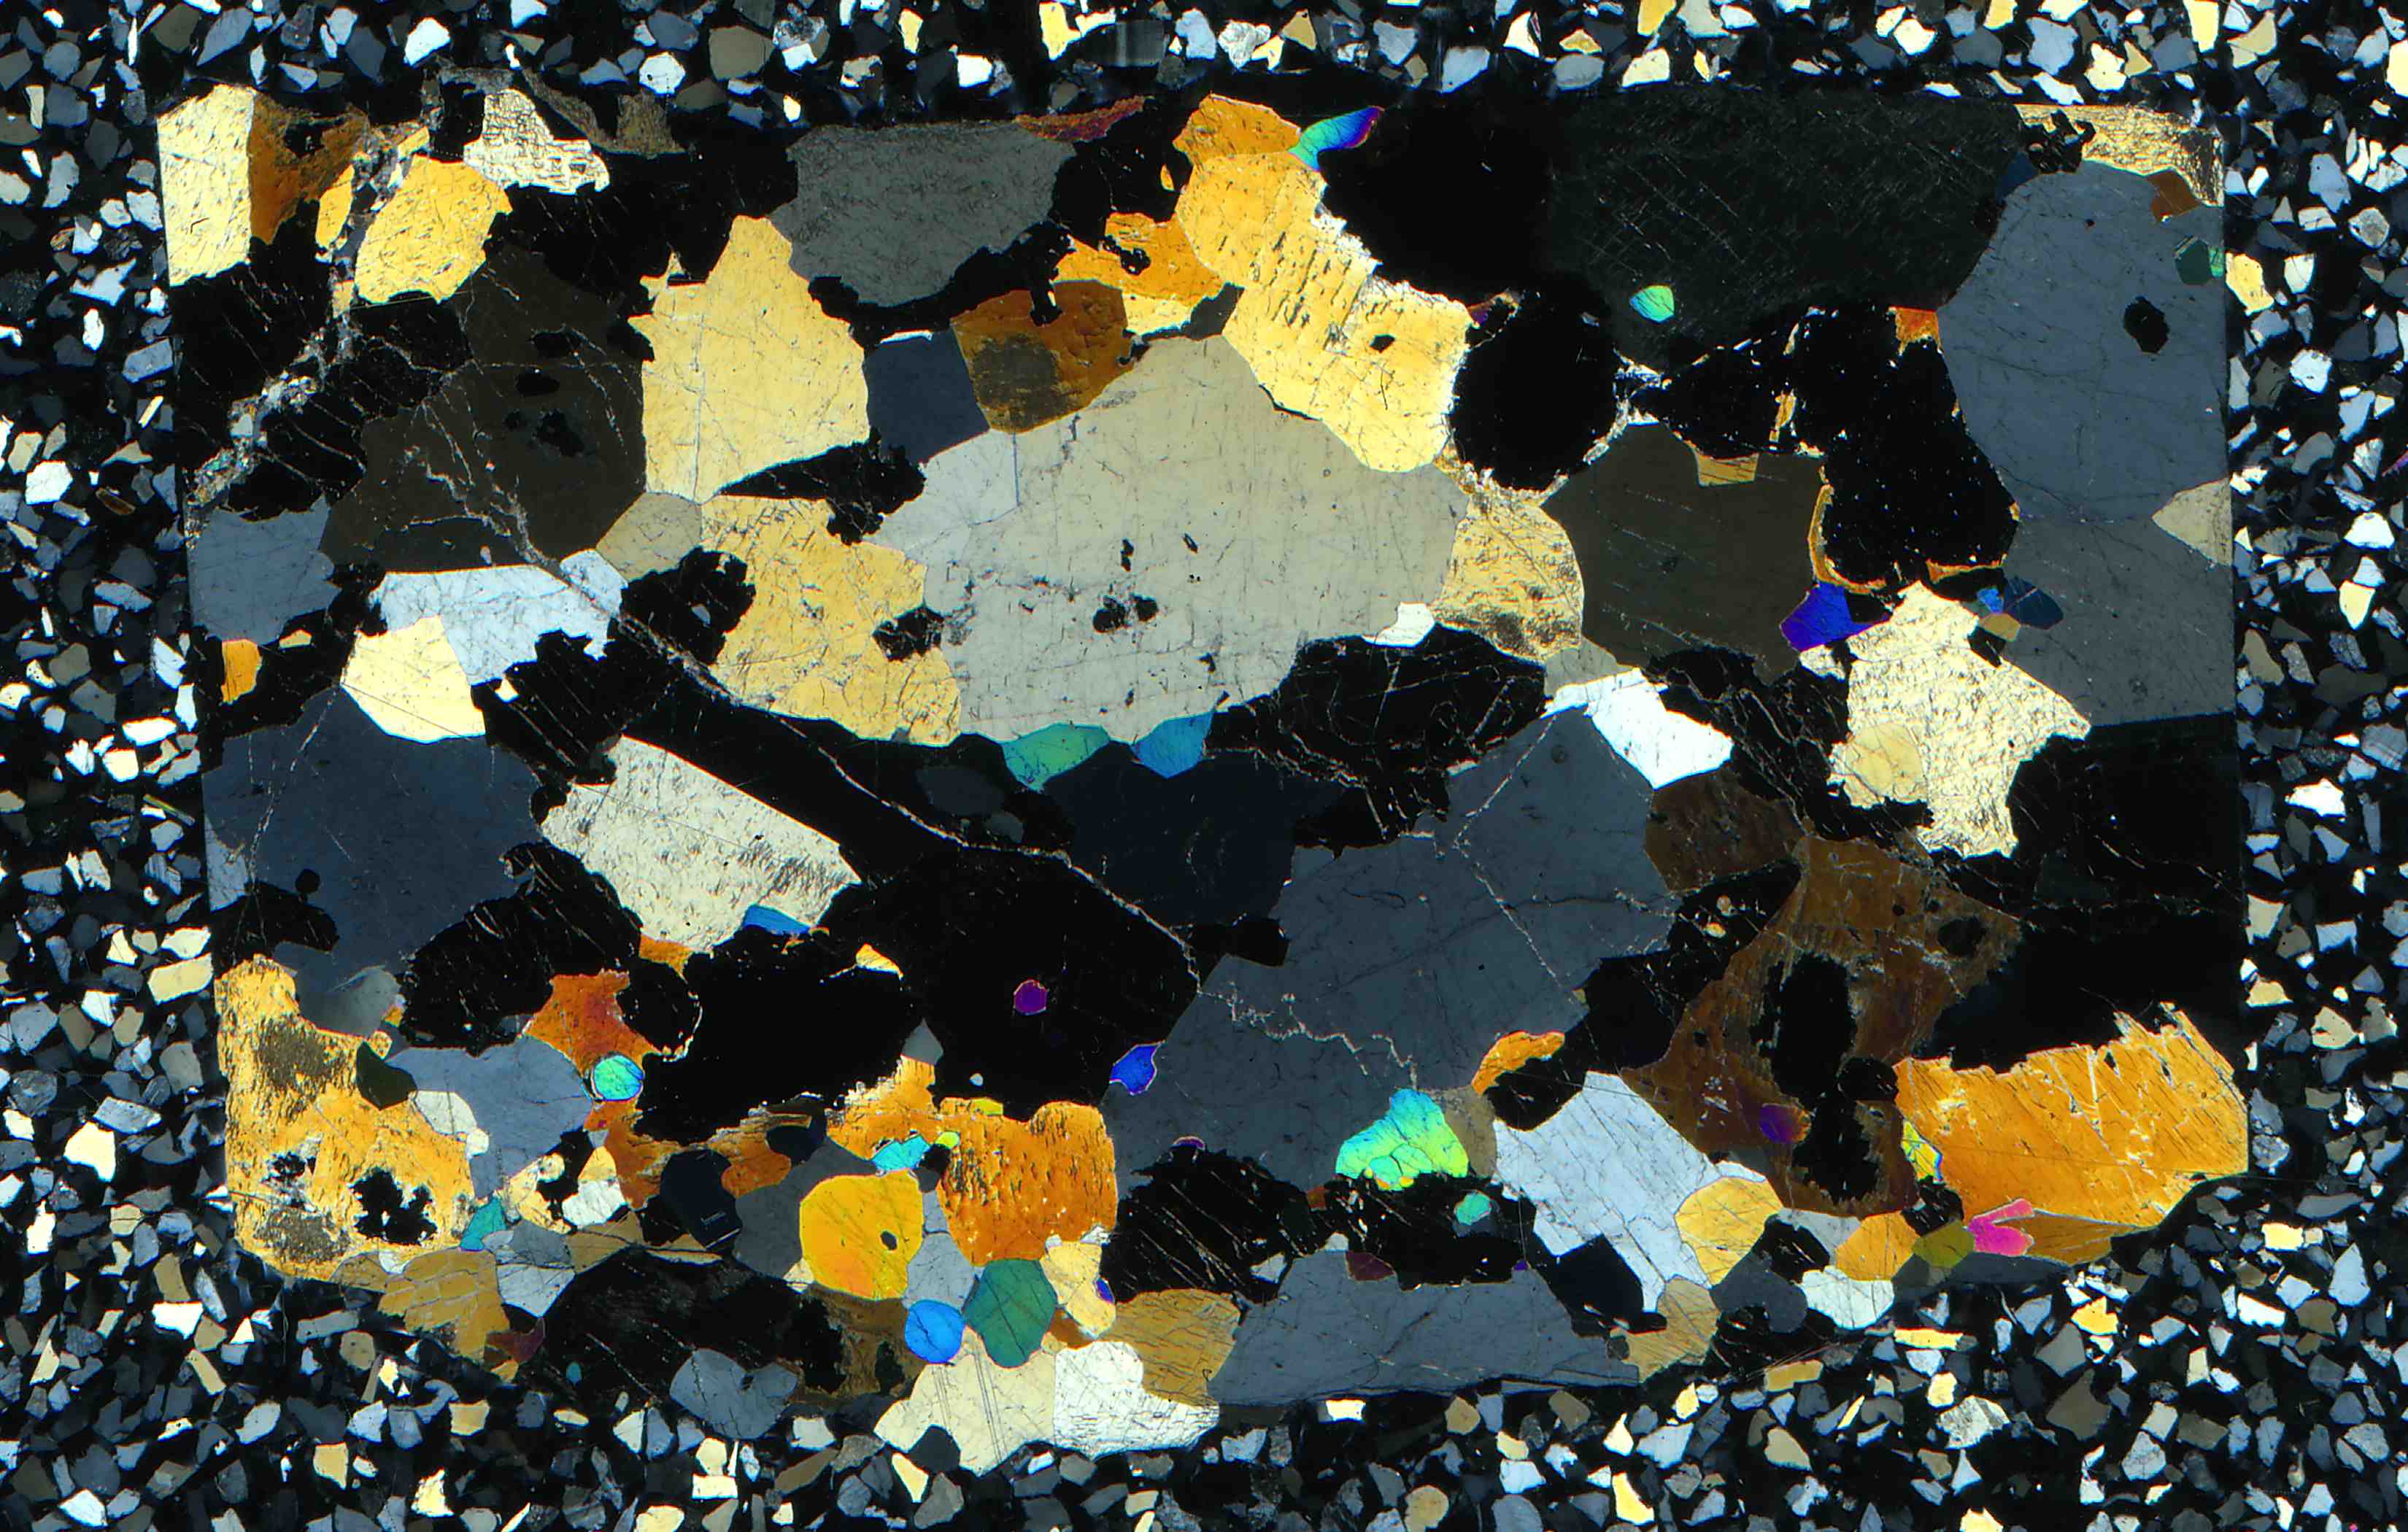 Willsboro New York garnet diopside and wollastonite marble in thin section